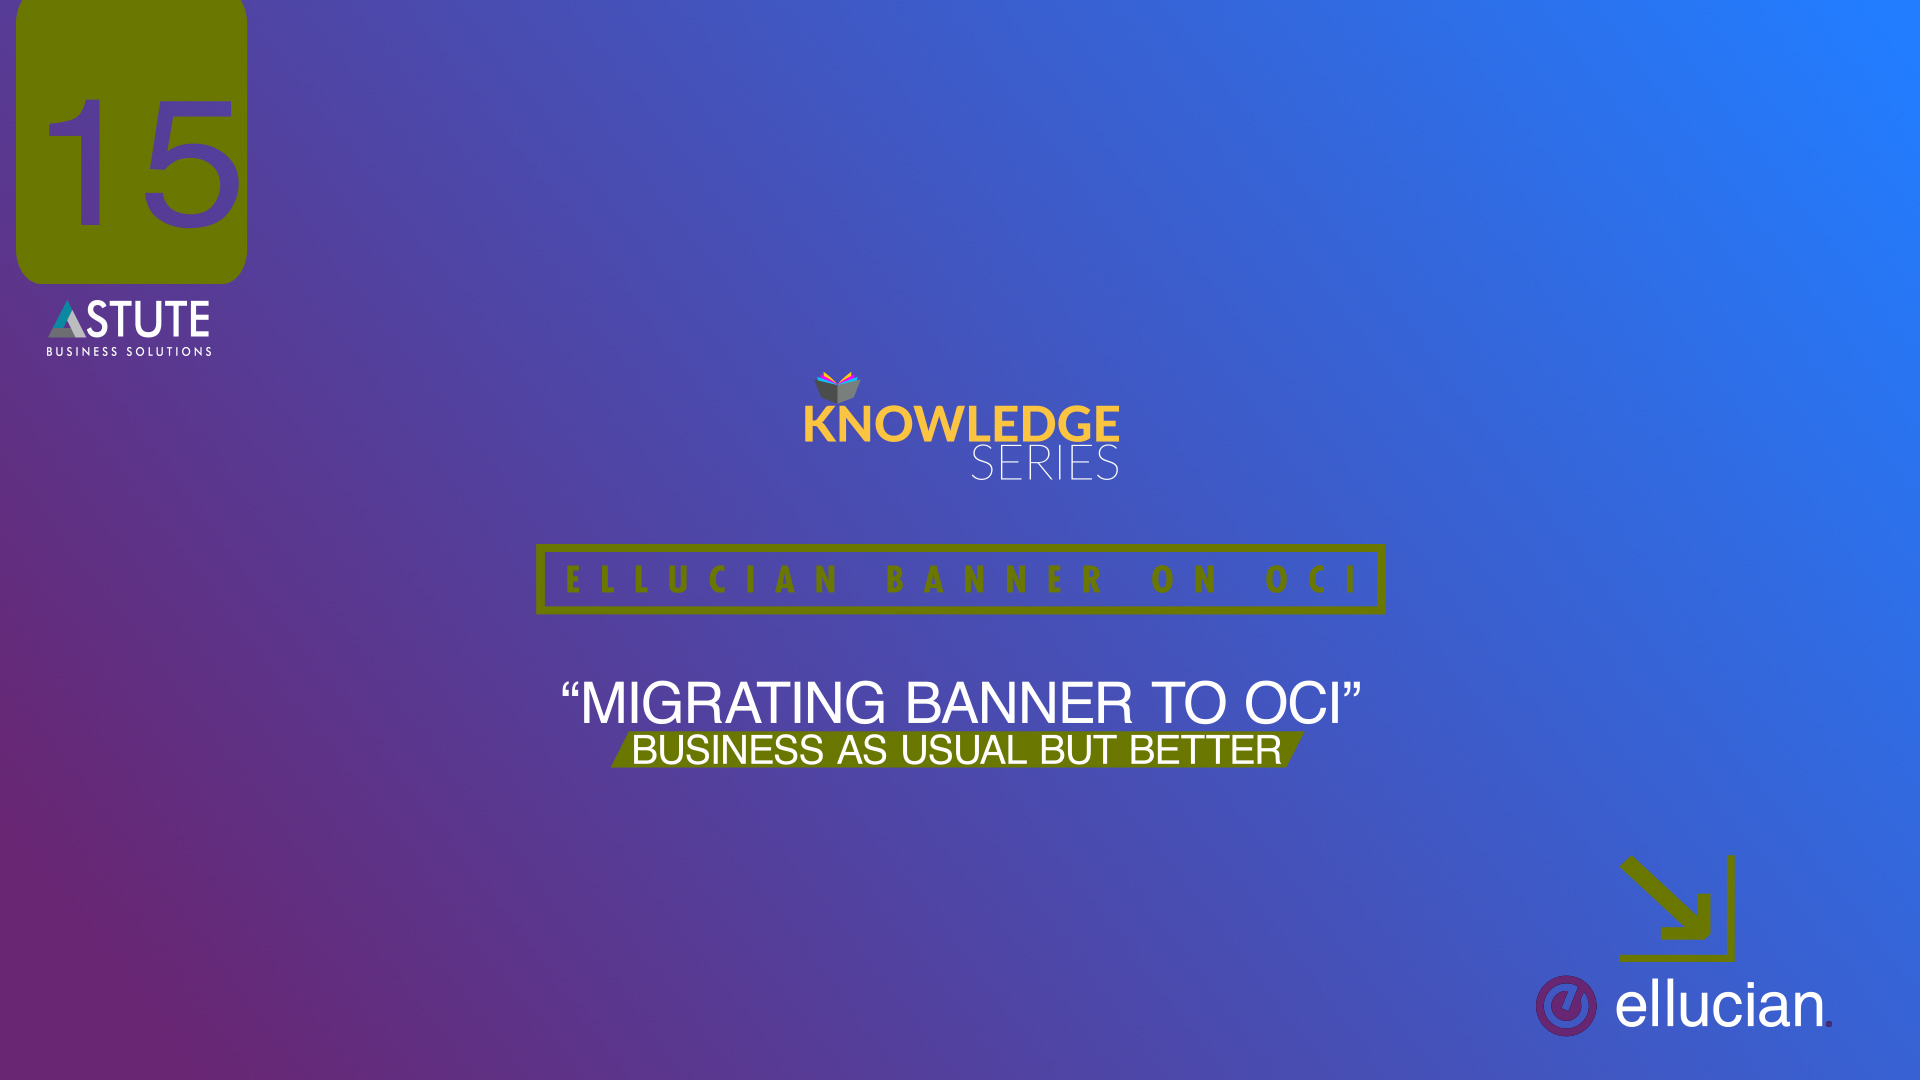 #15 Ellucian _Migrating Banner To OCI- Business As usual but Better